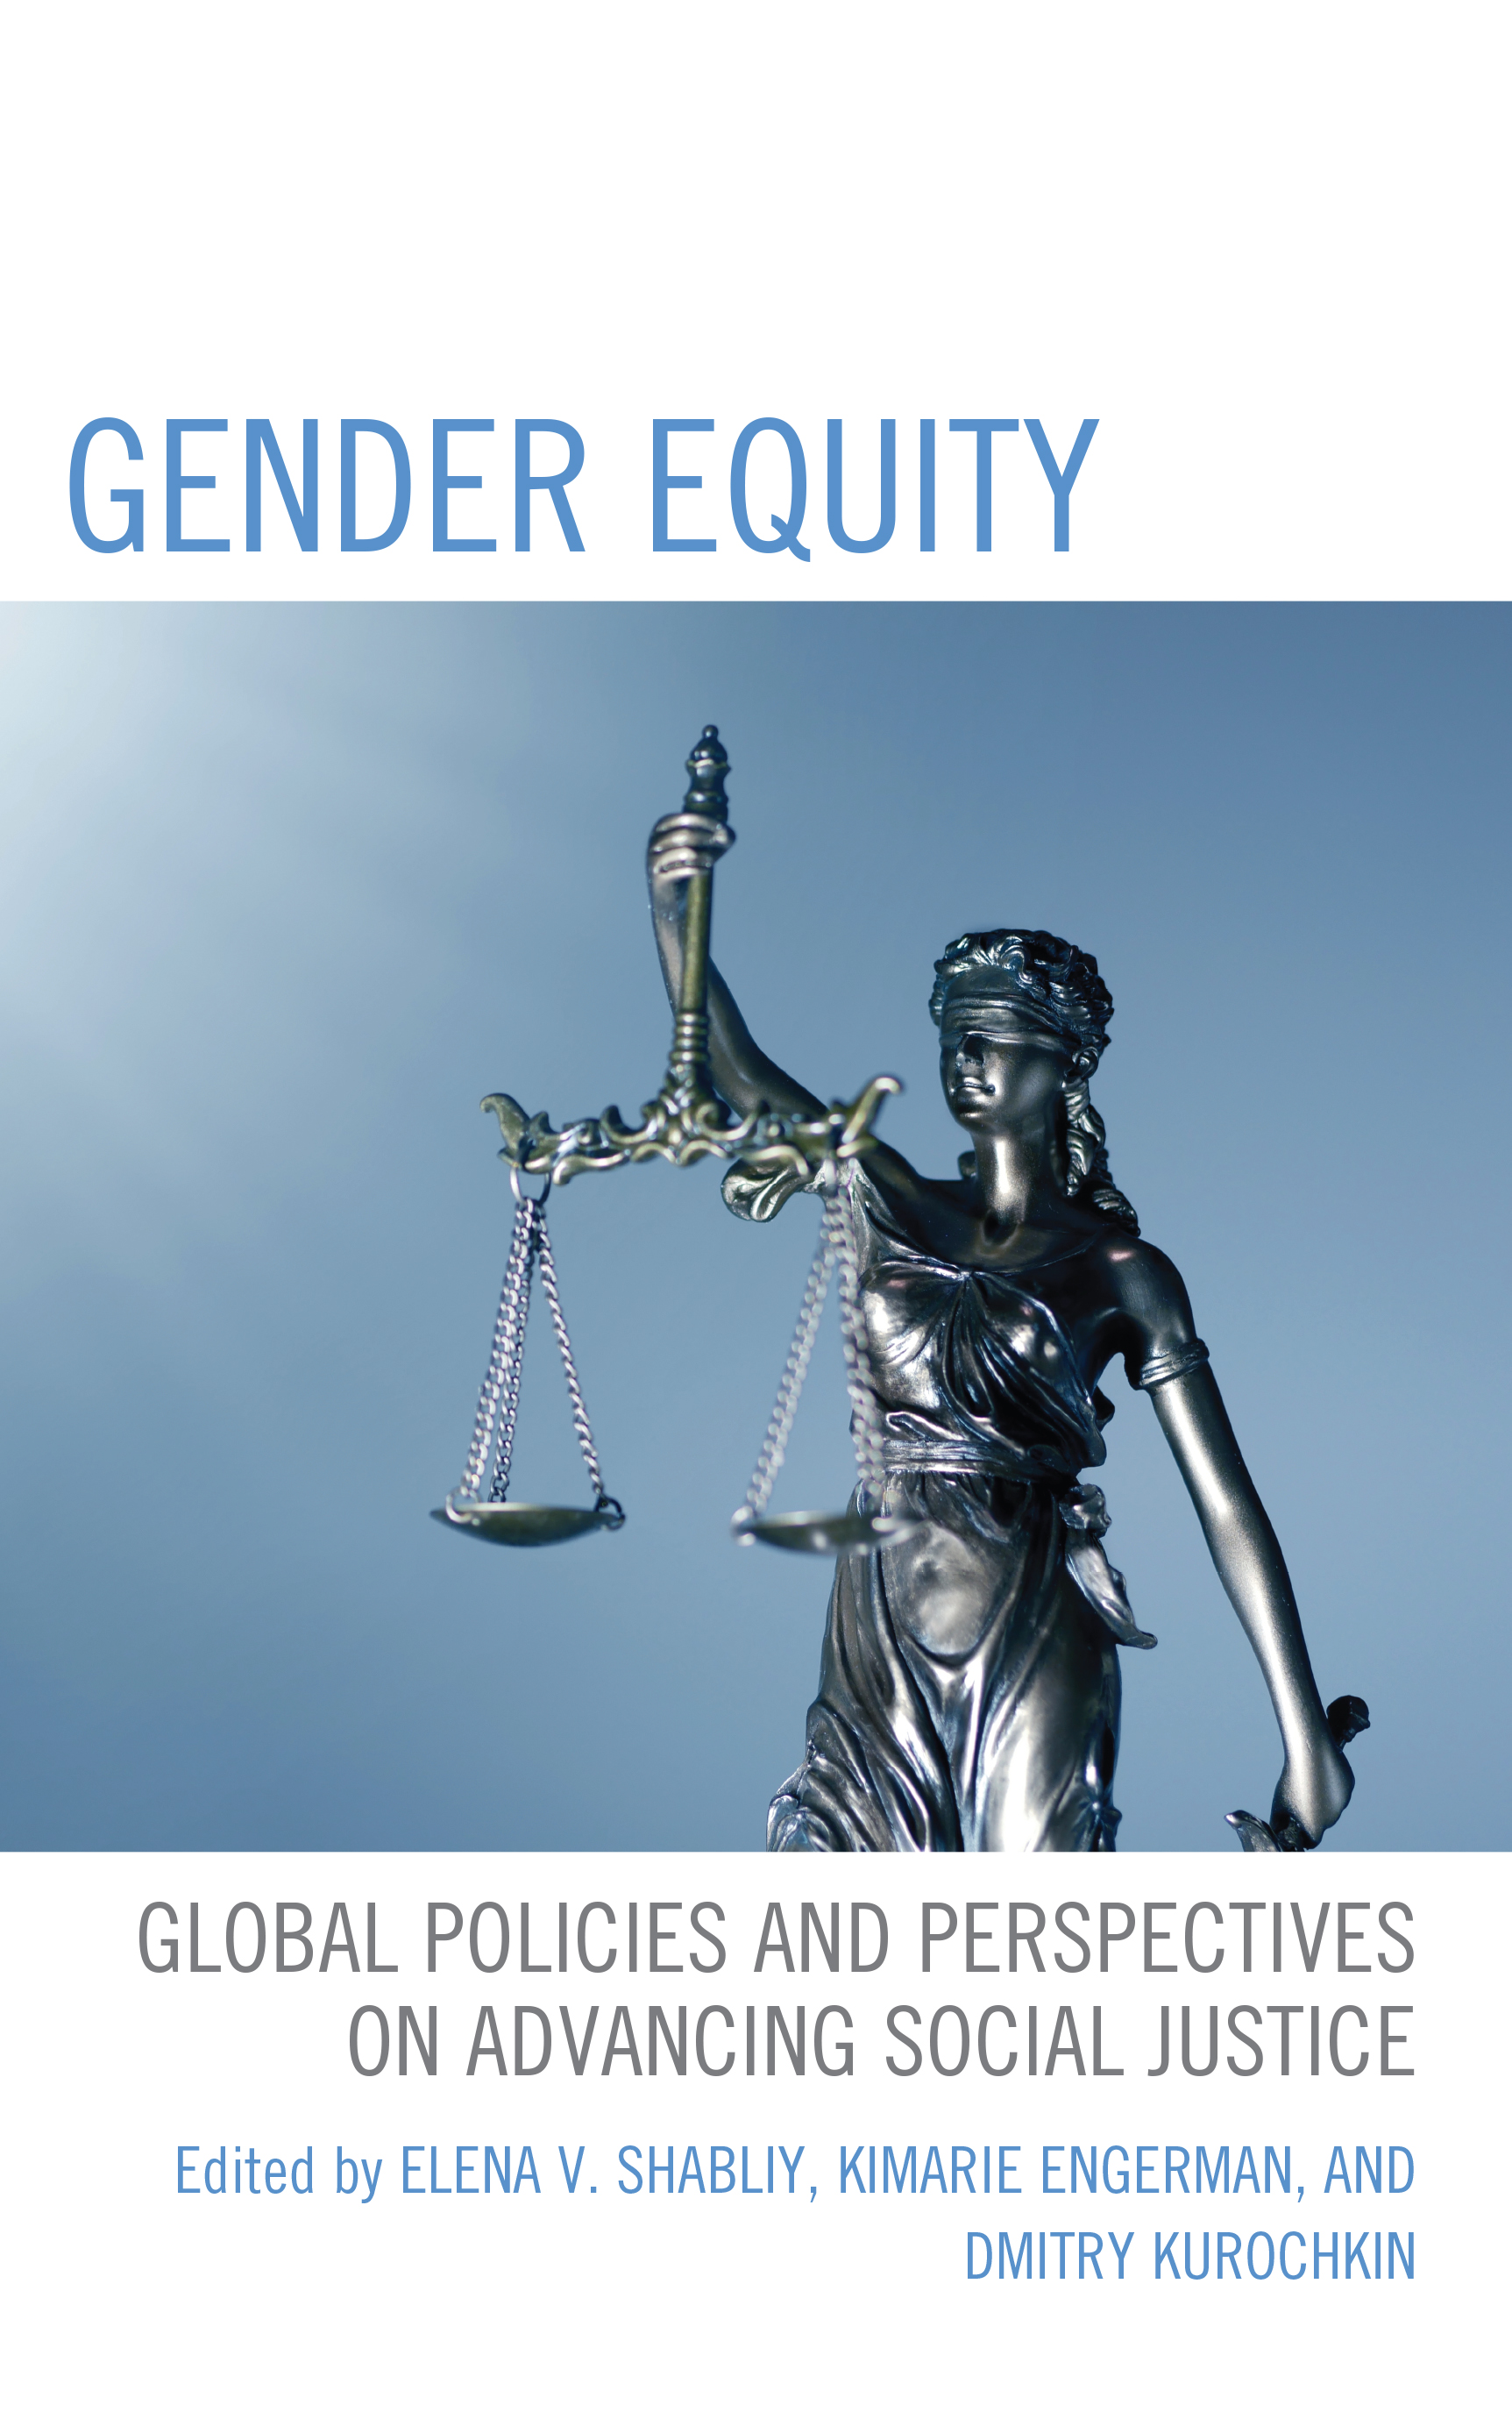 Gender Equity: Global Policies and Perspectives on Advancing Social Justice